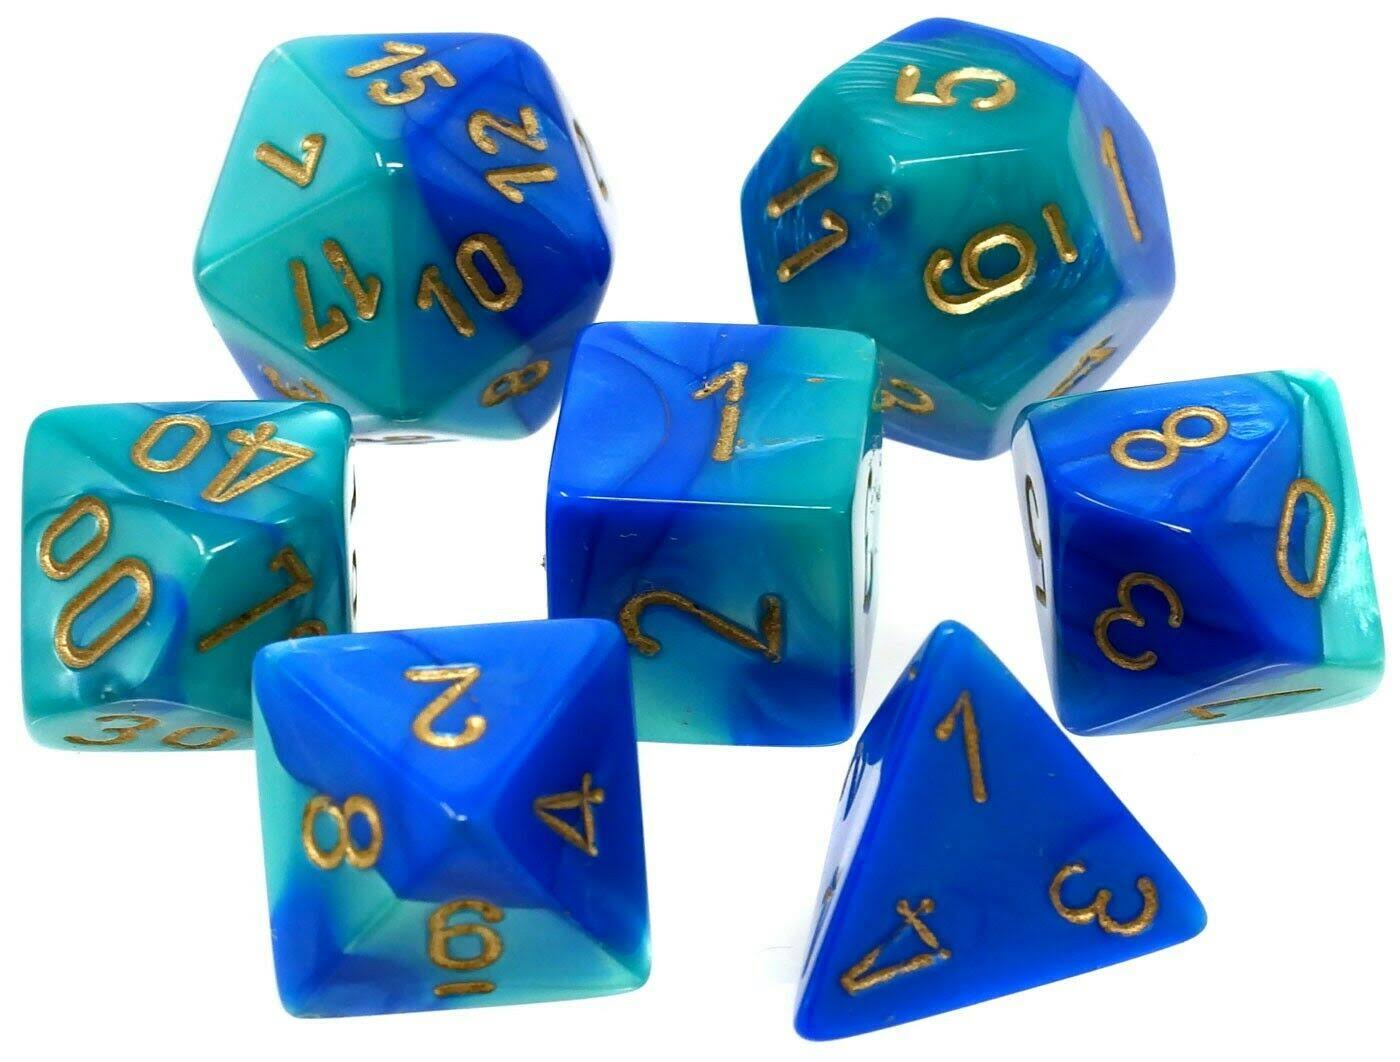 Chessex Gemini Poly 7 Dice Set: Blue-Teal/gold